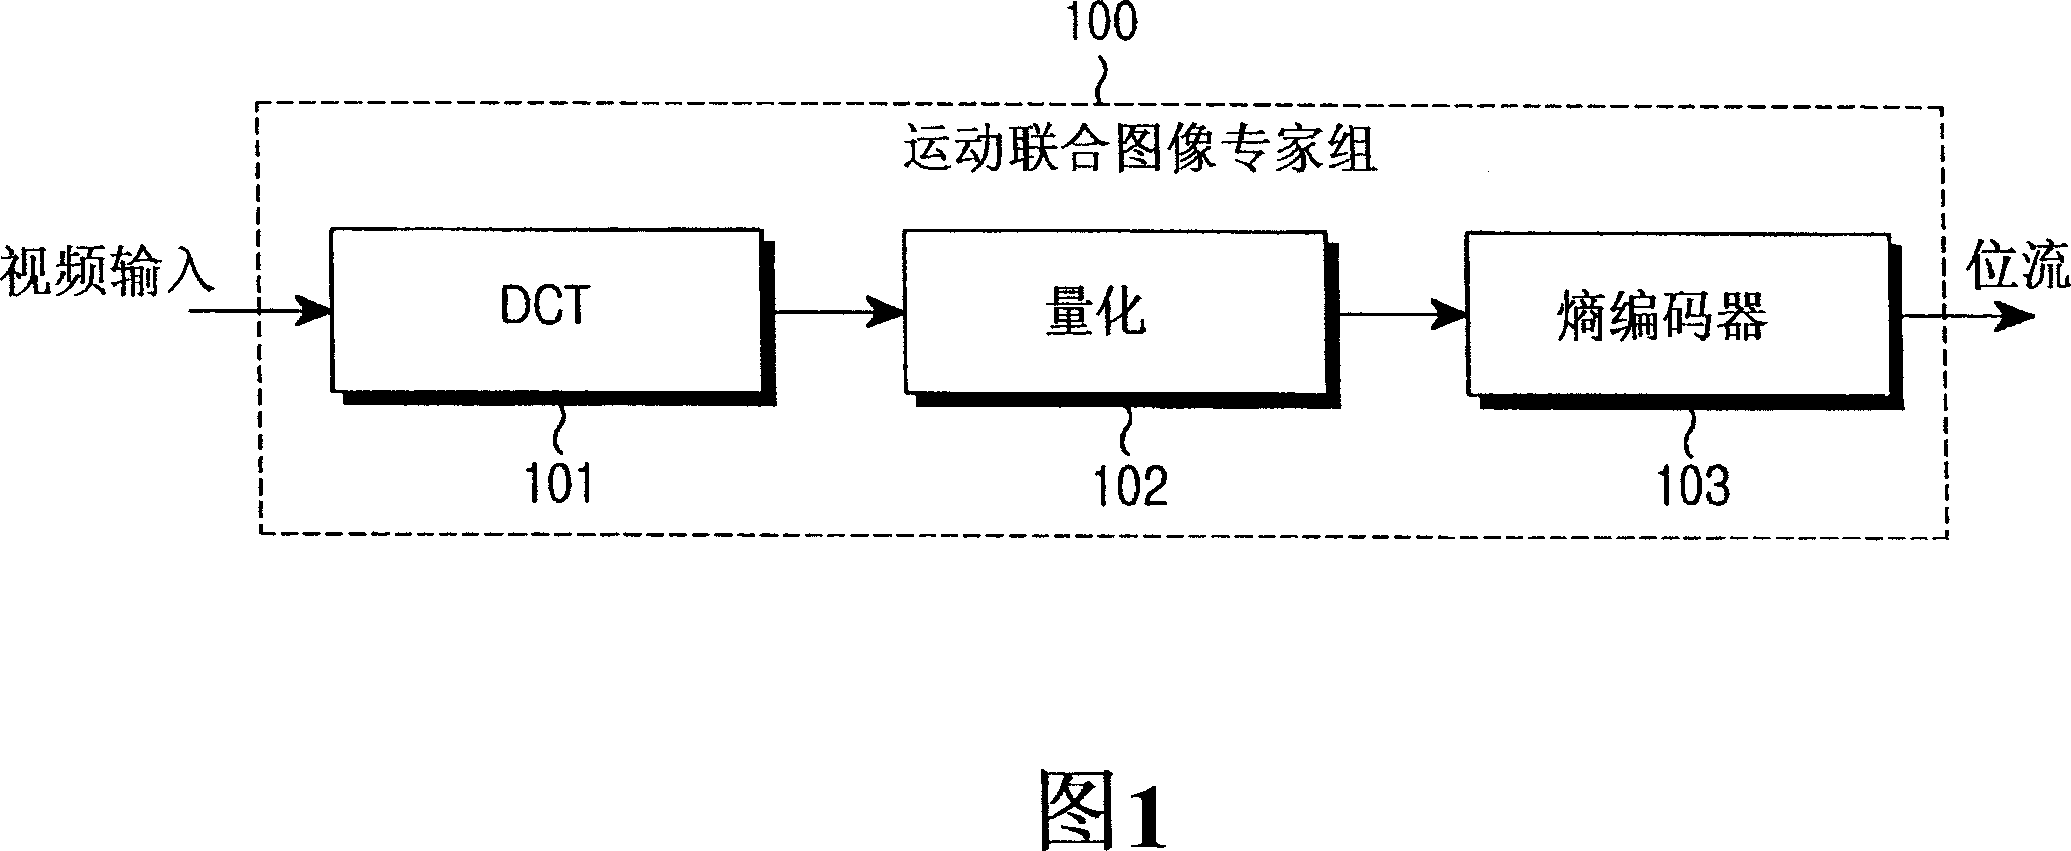 Method and device for compressing image data